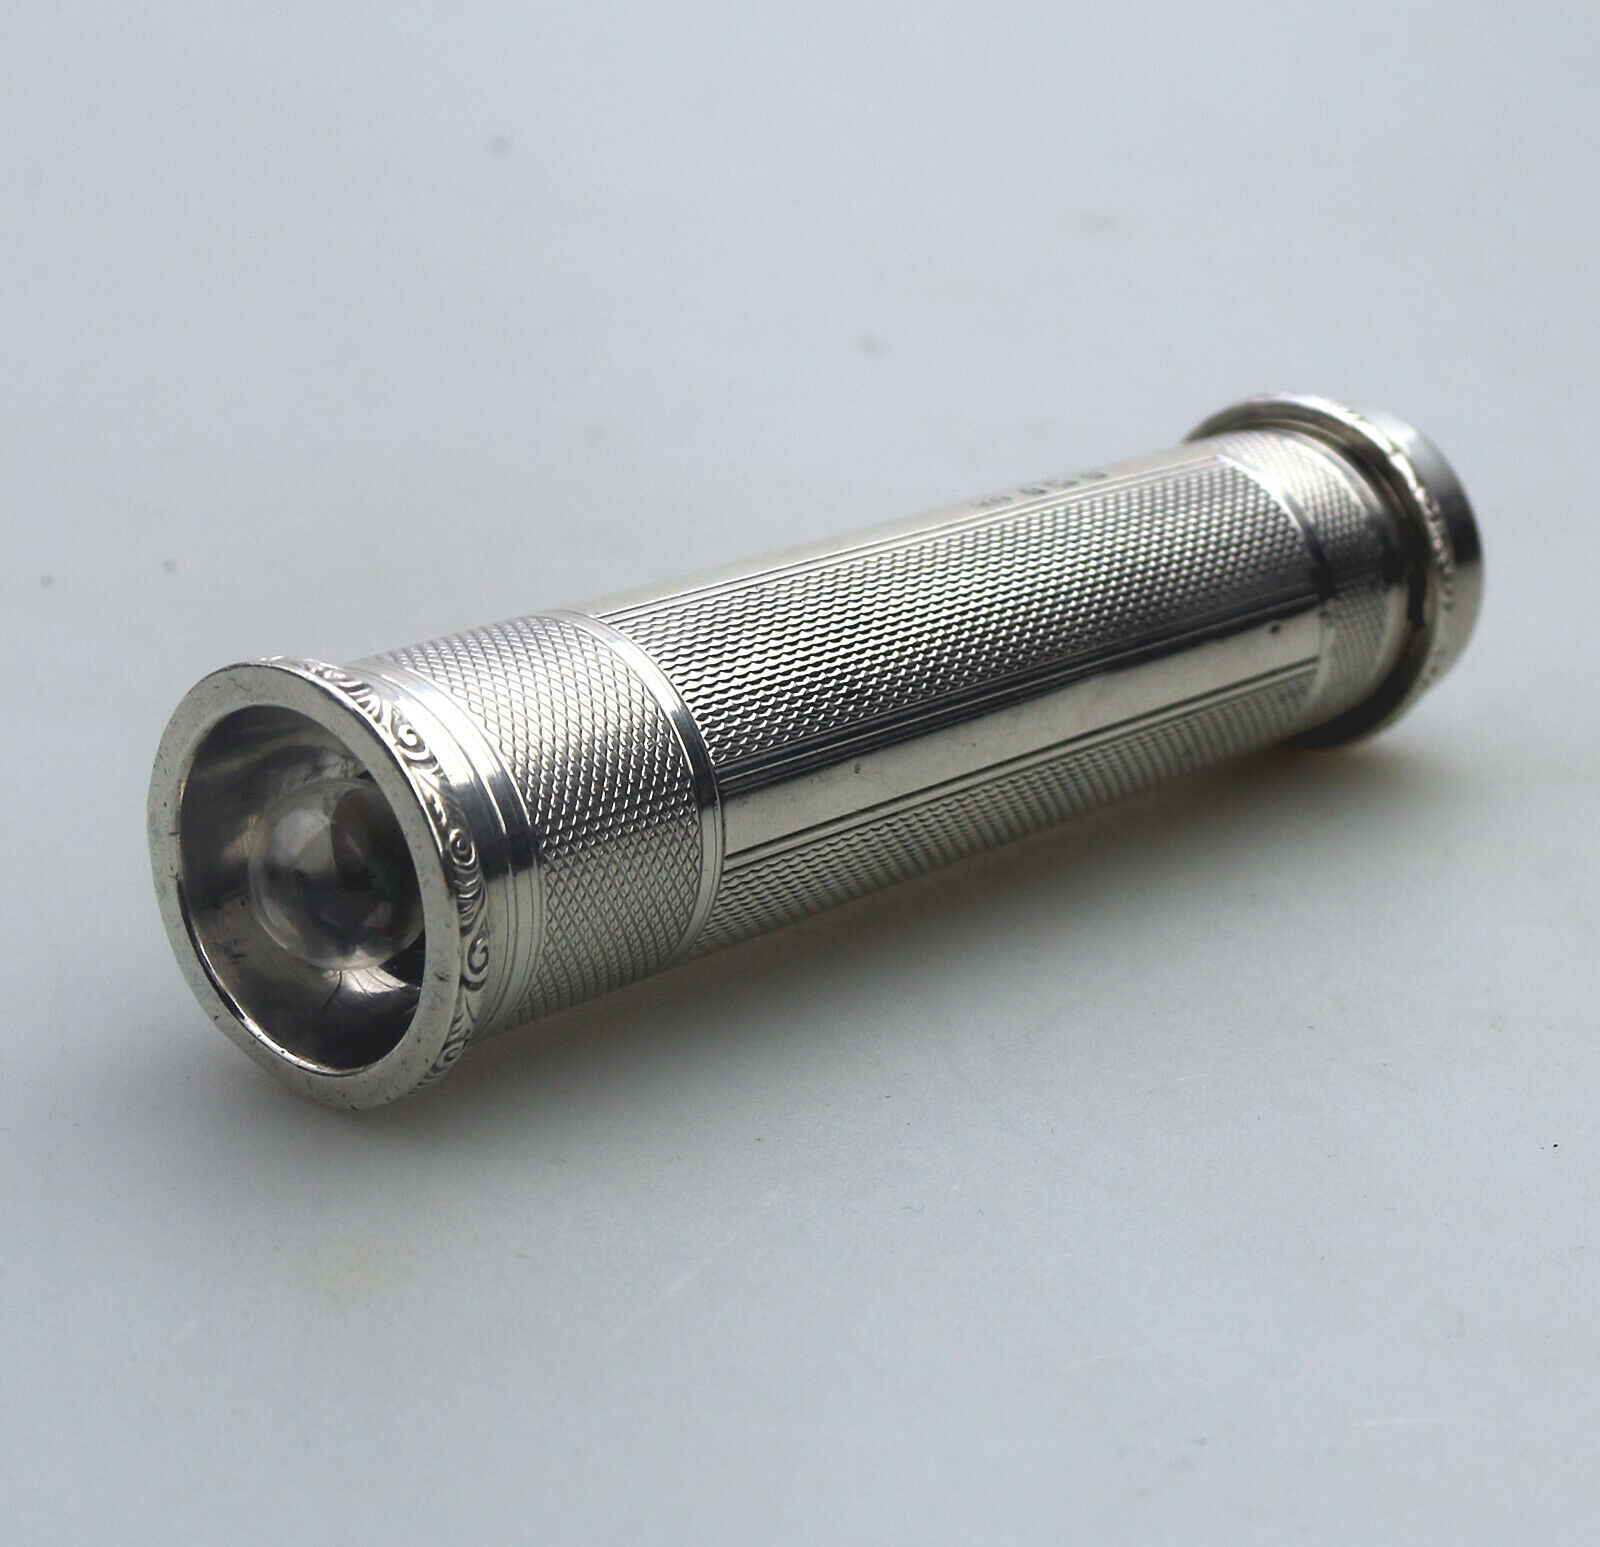 A WWII Era Blitz / Doctors solid silver Torch C.1940